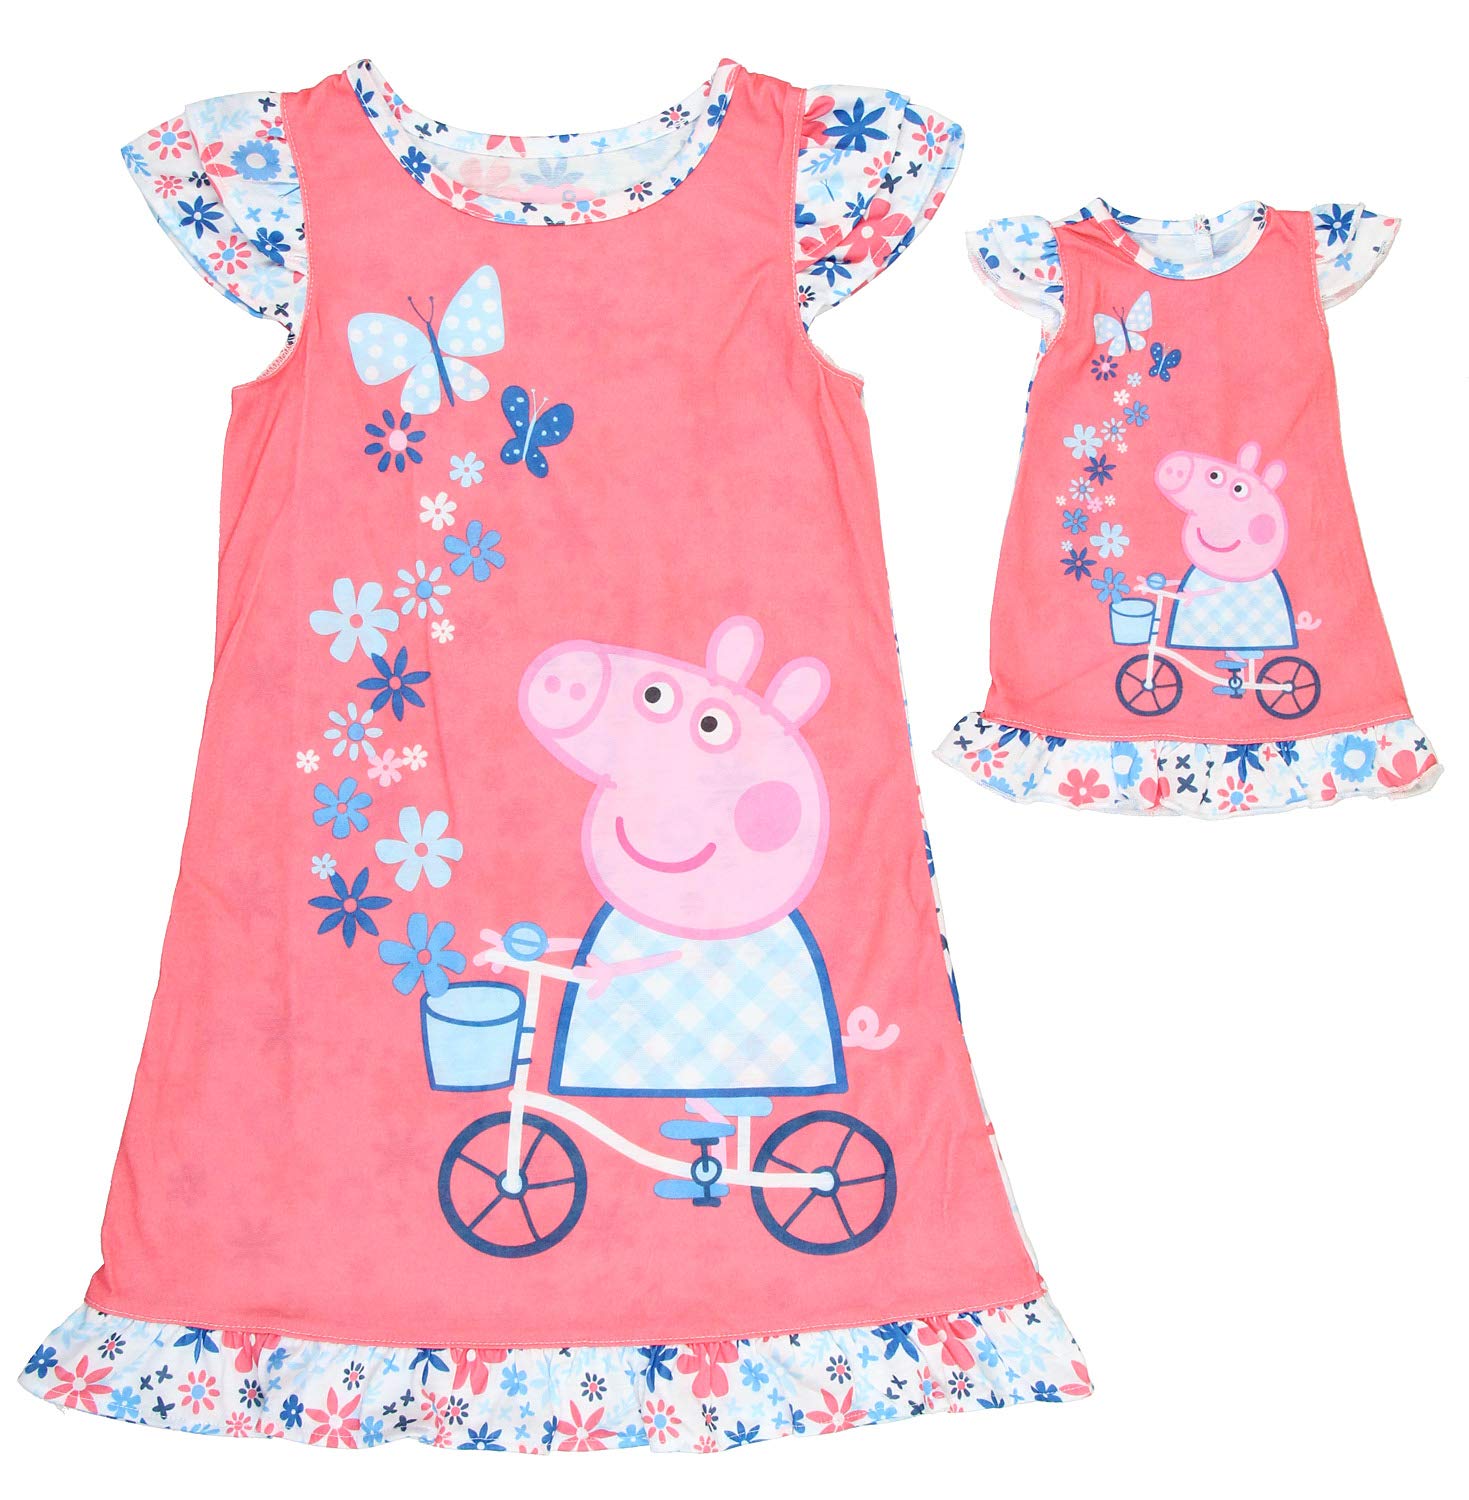 Peppa Pig Toddler Girls Spring Bicycle Nightgown with Matching Gown for 18